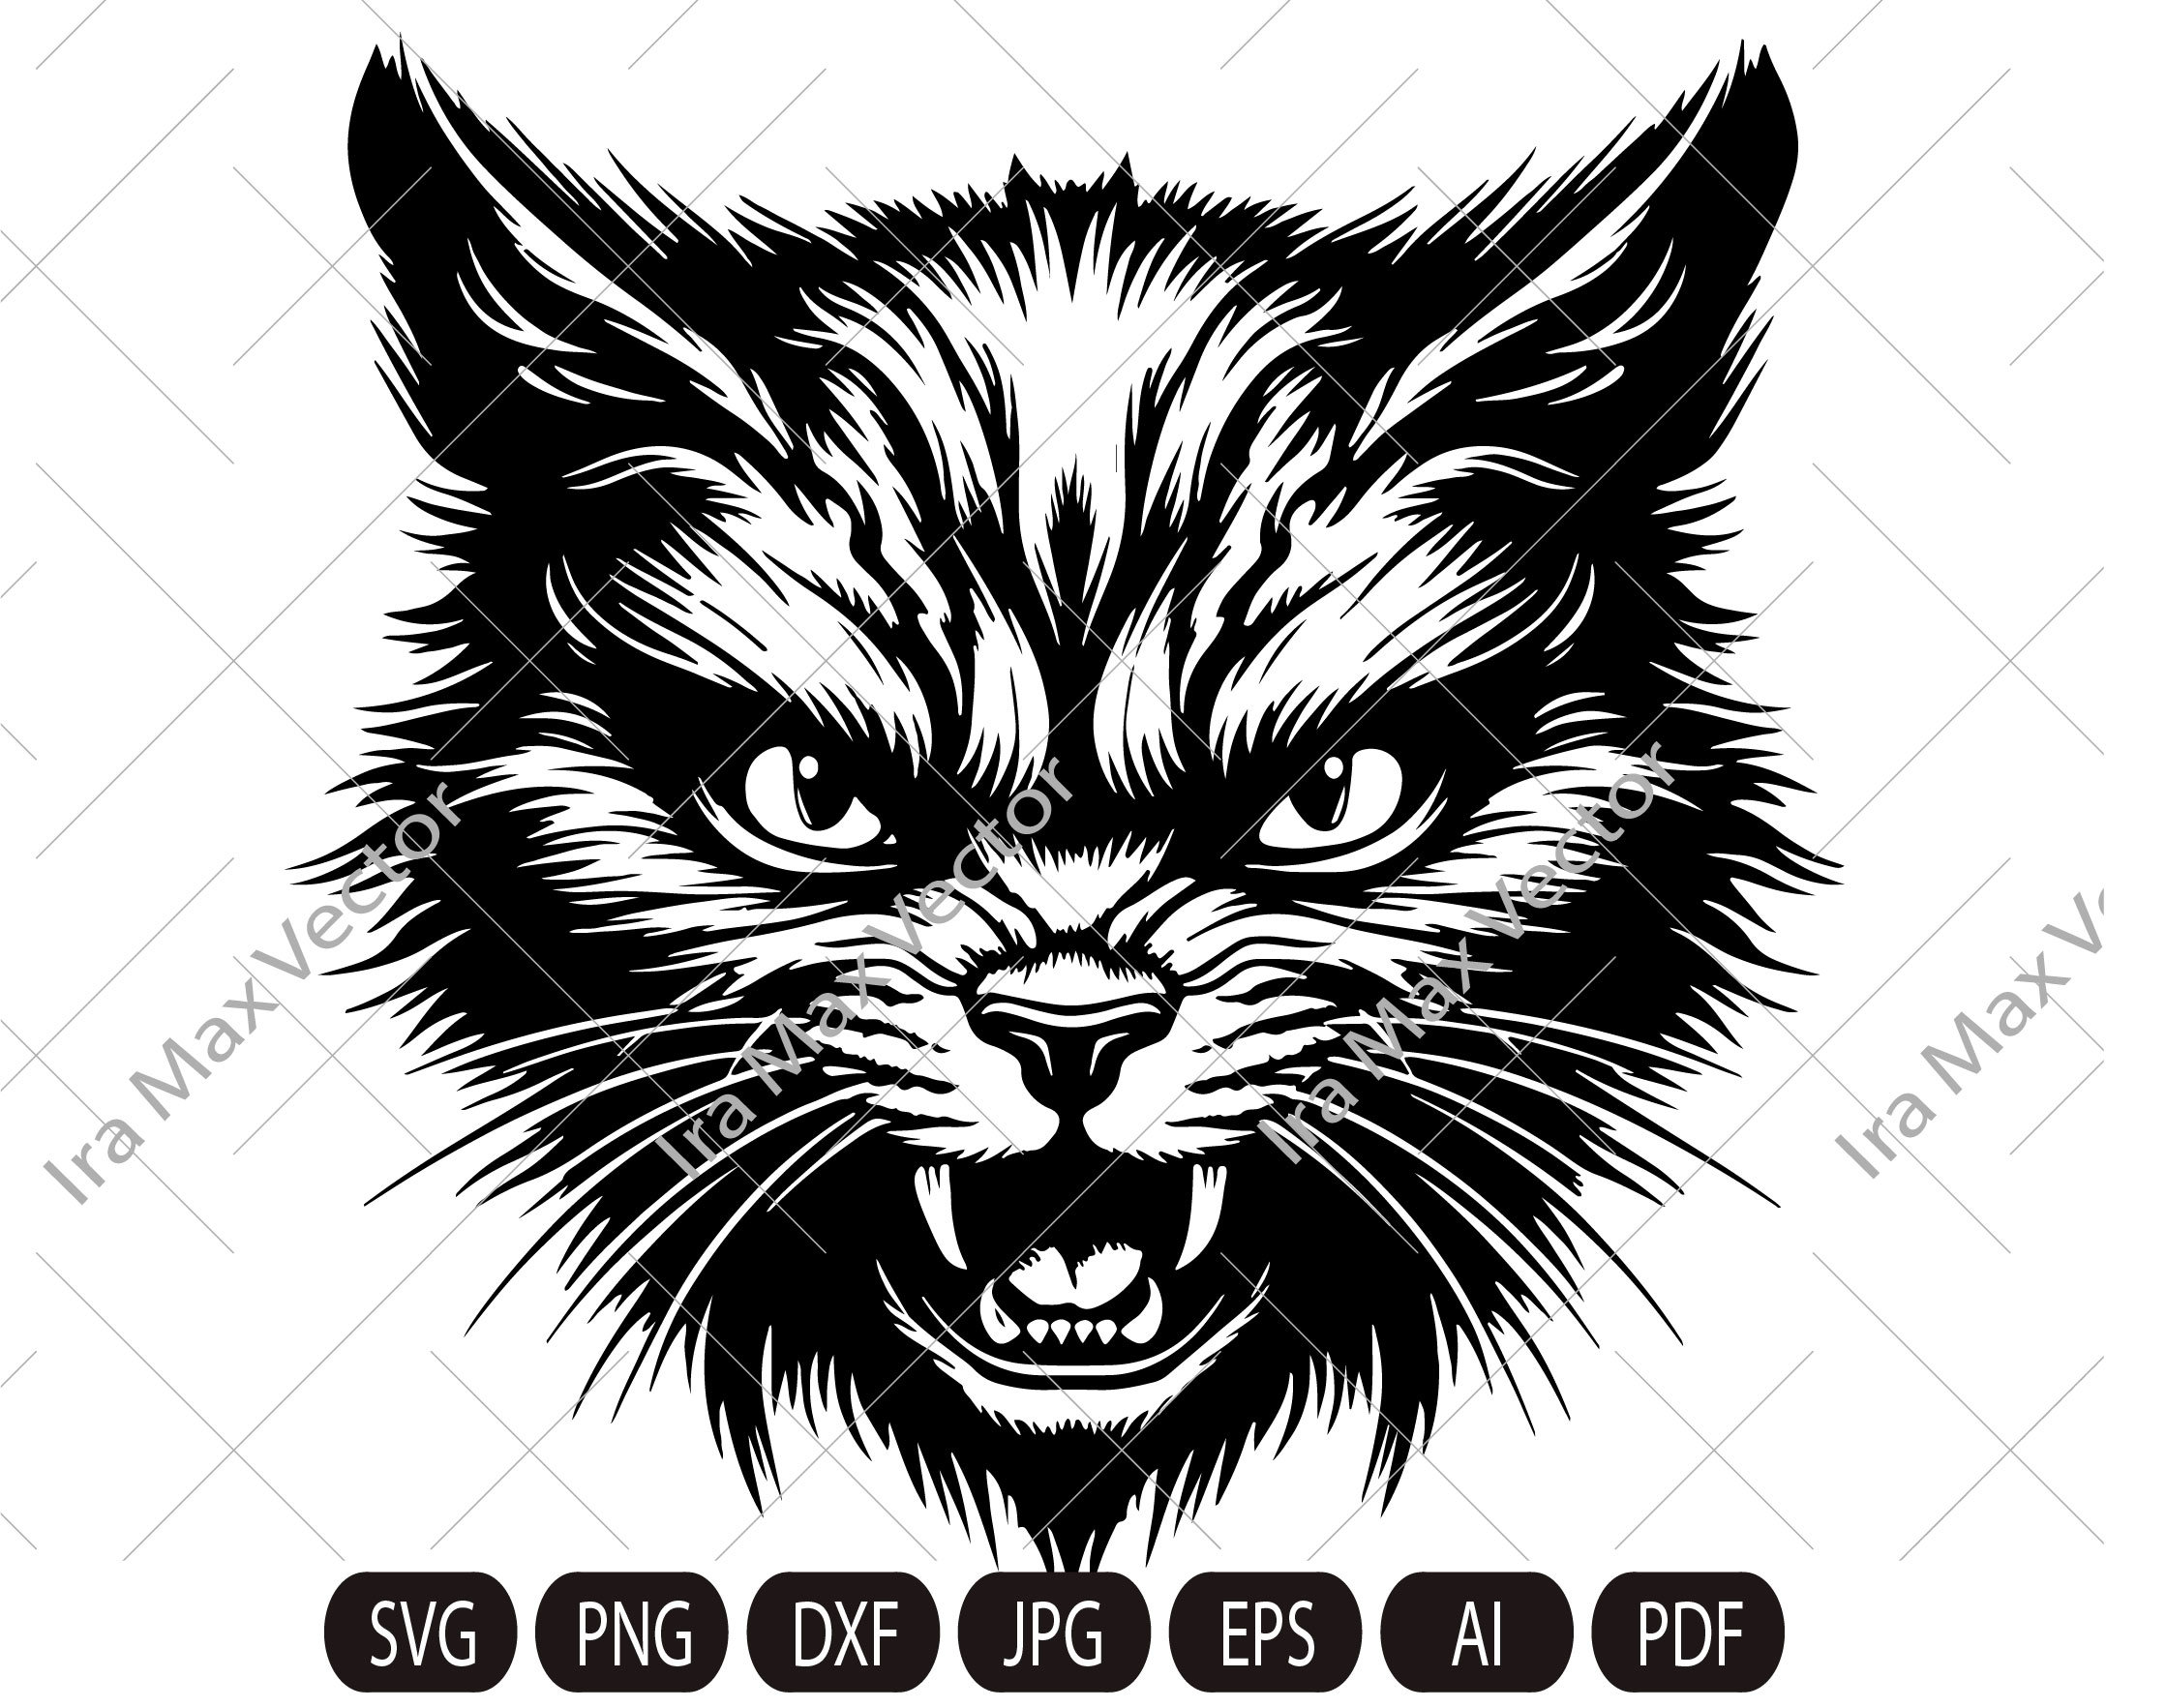 6,059 Angry Cat Face Icons - Free in SVG, PNG, ICO - IconScout